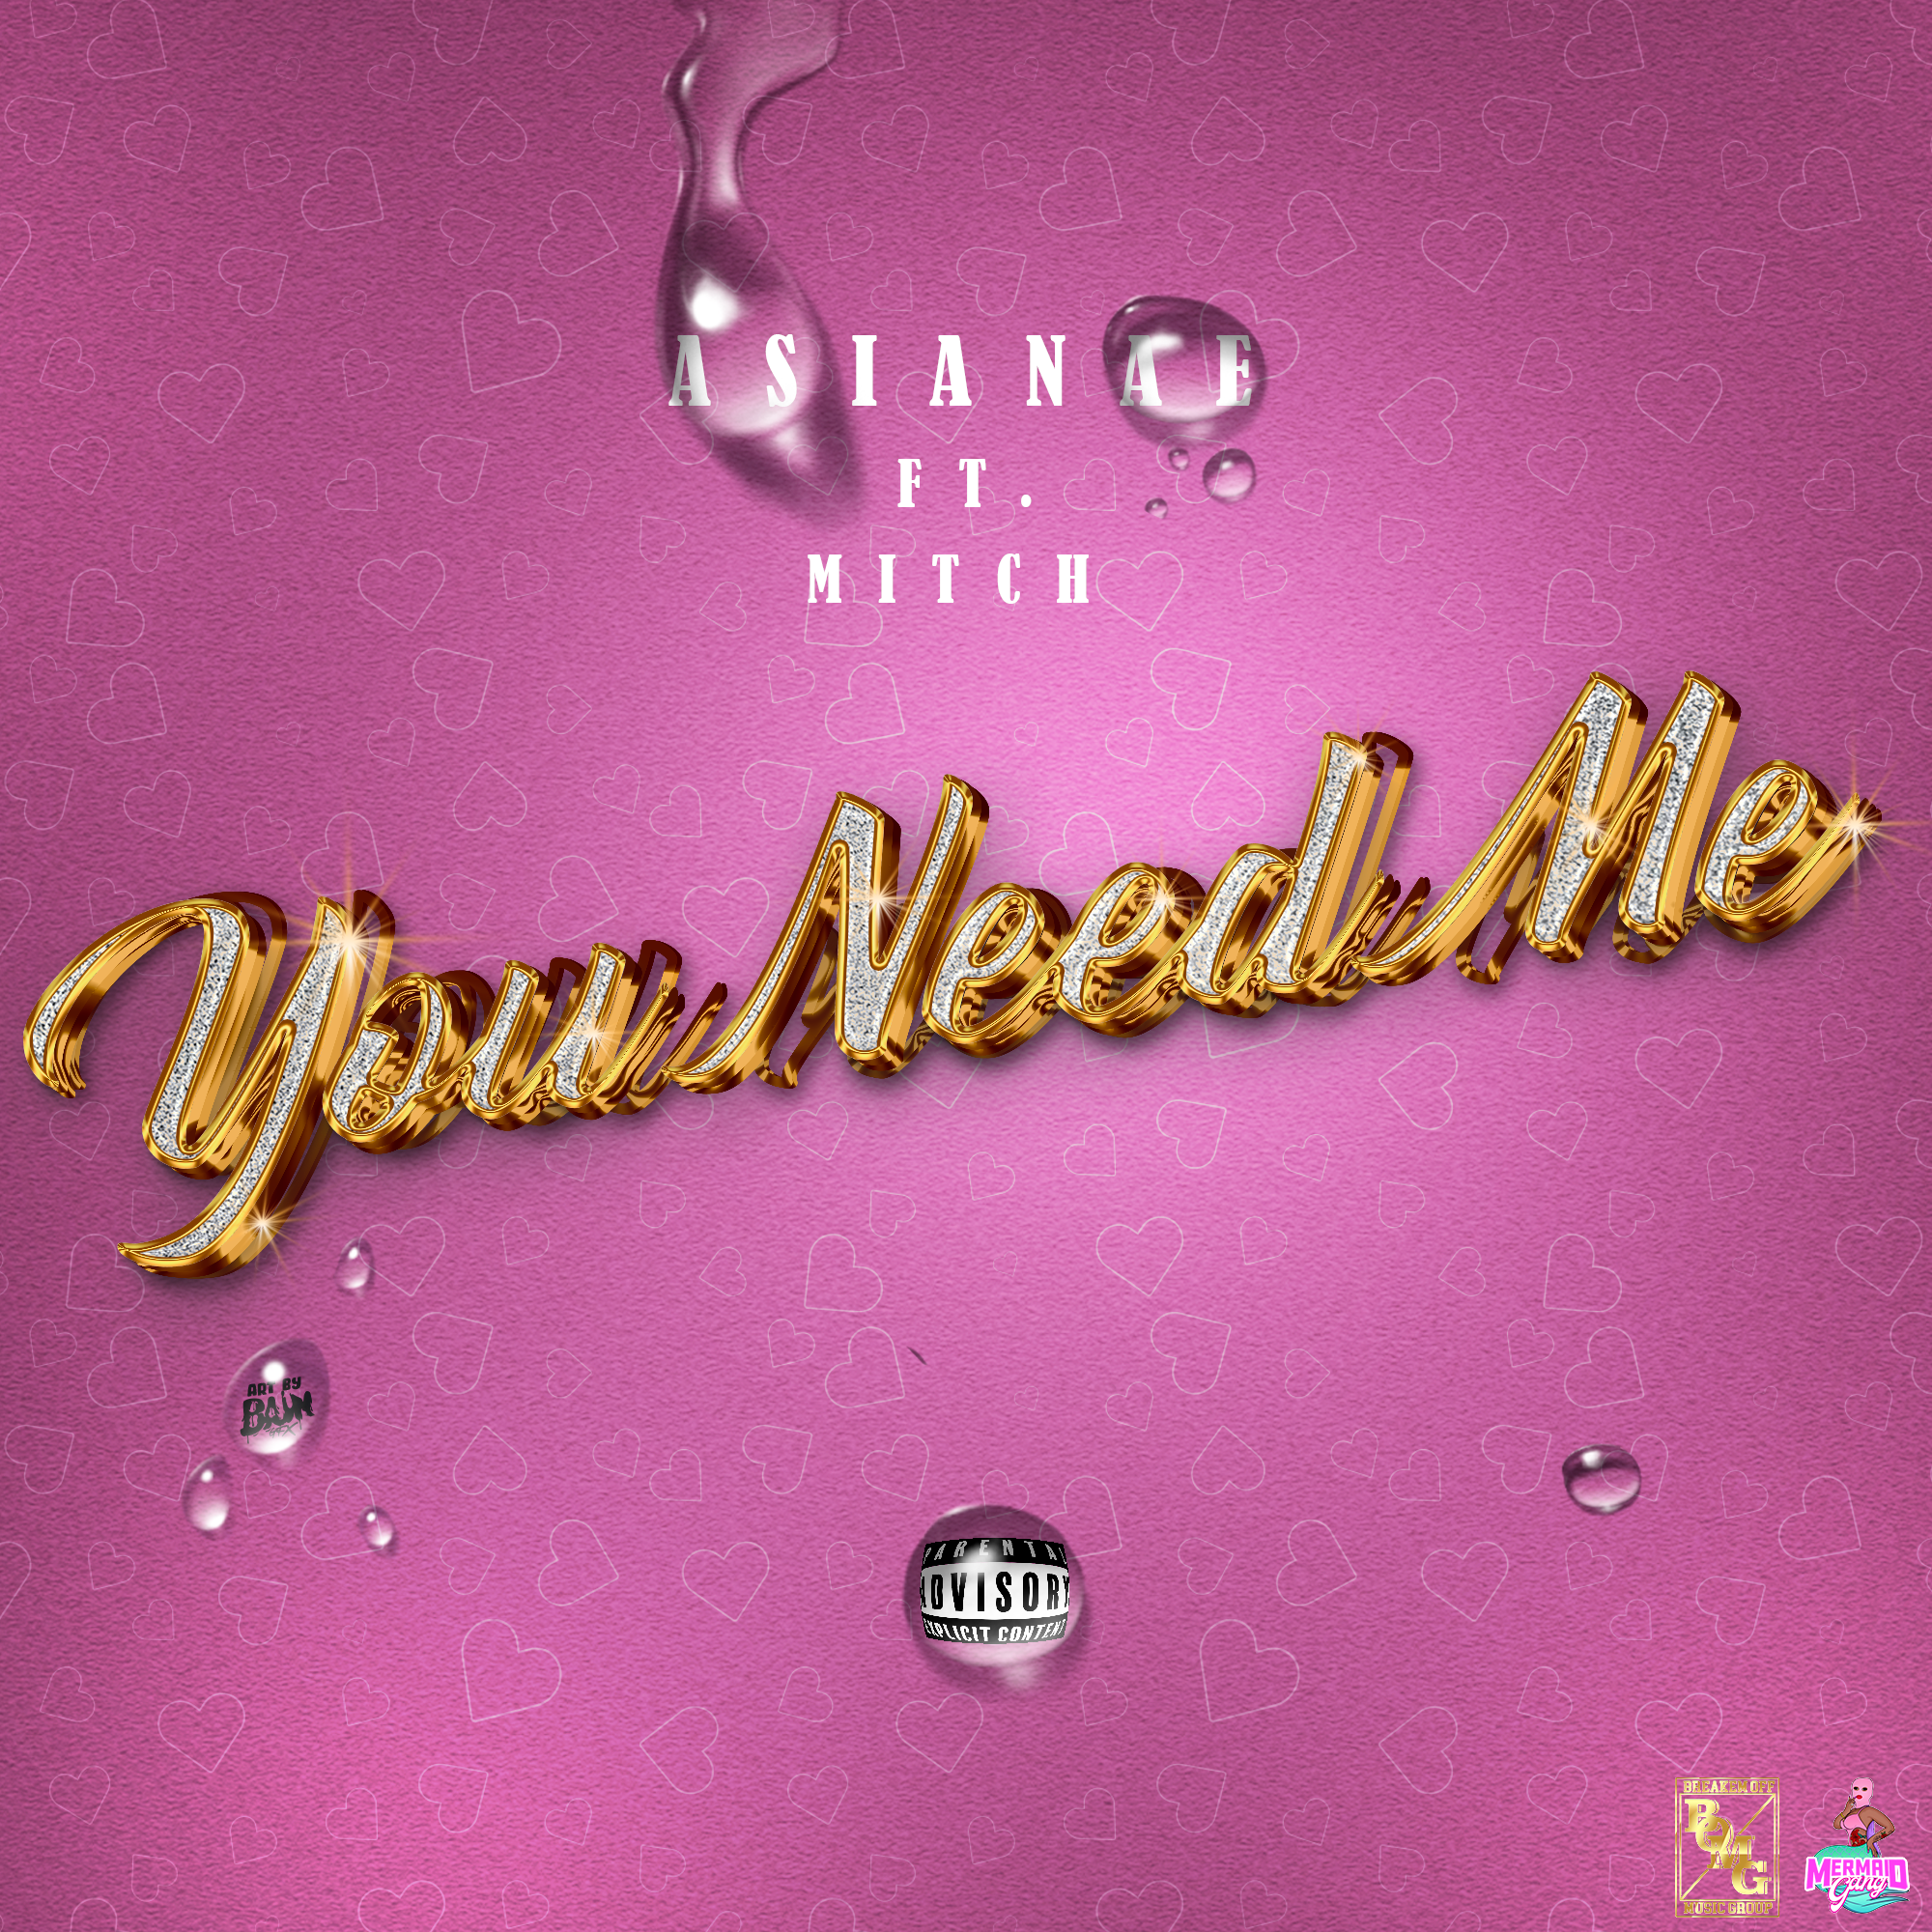 Art for  You Need Me   by Asianae feat Mitch